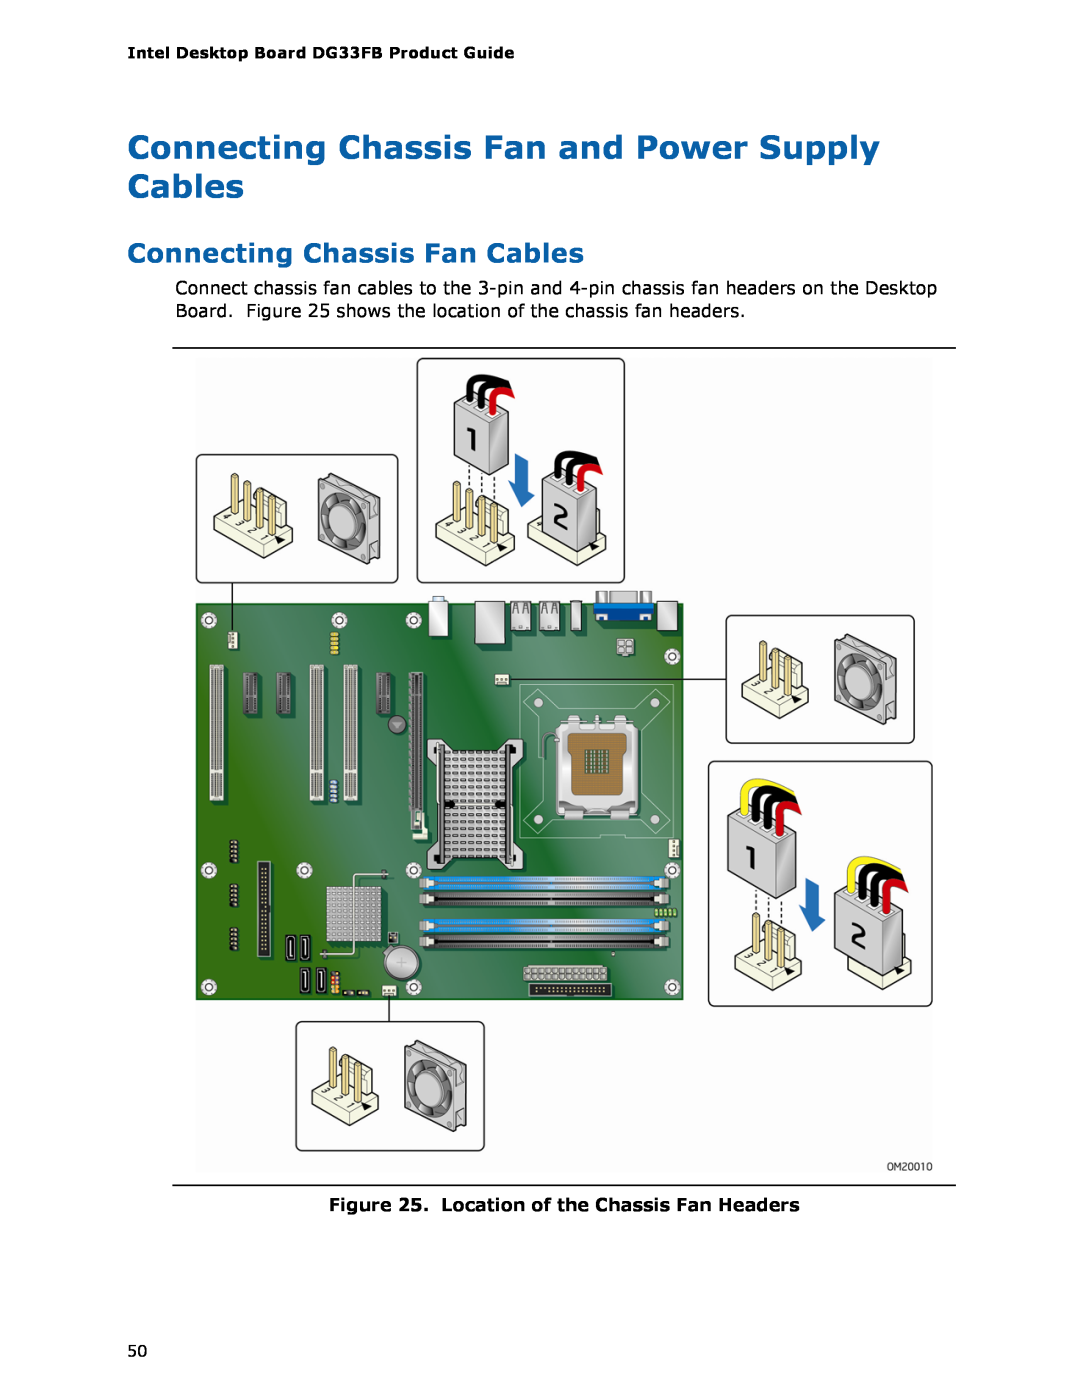 Intel DG33FB manual Connecting Chassis Fan and Power Supply Cables, Connecting Chassis Fan Cables 